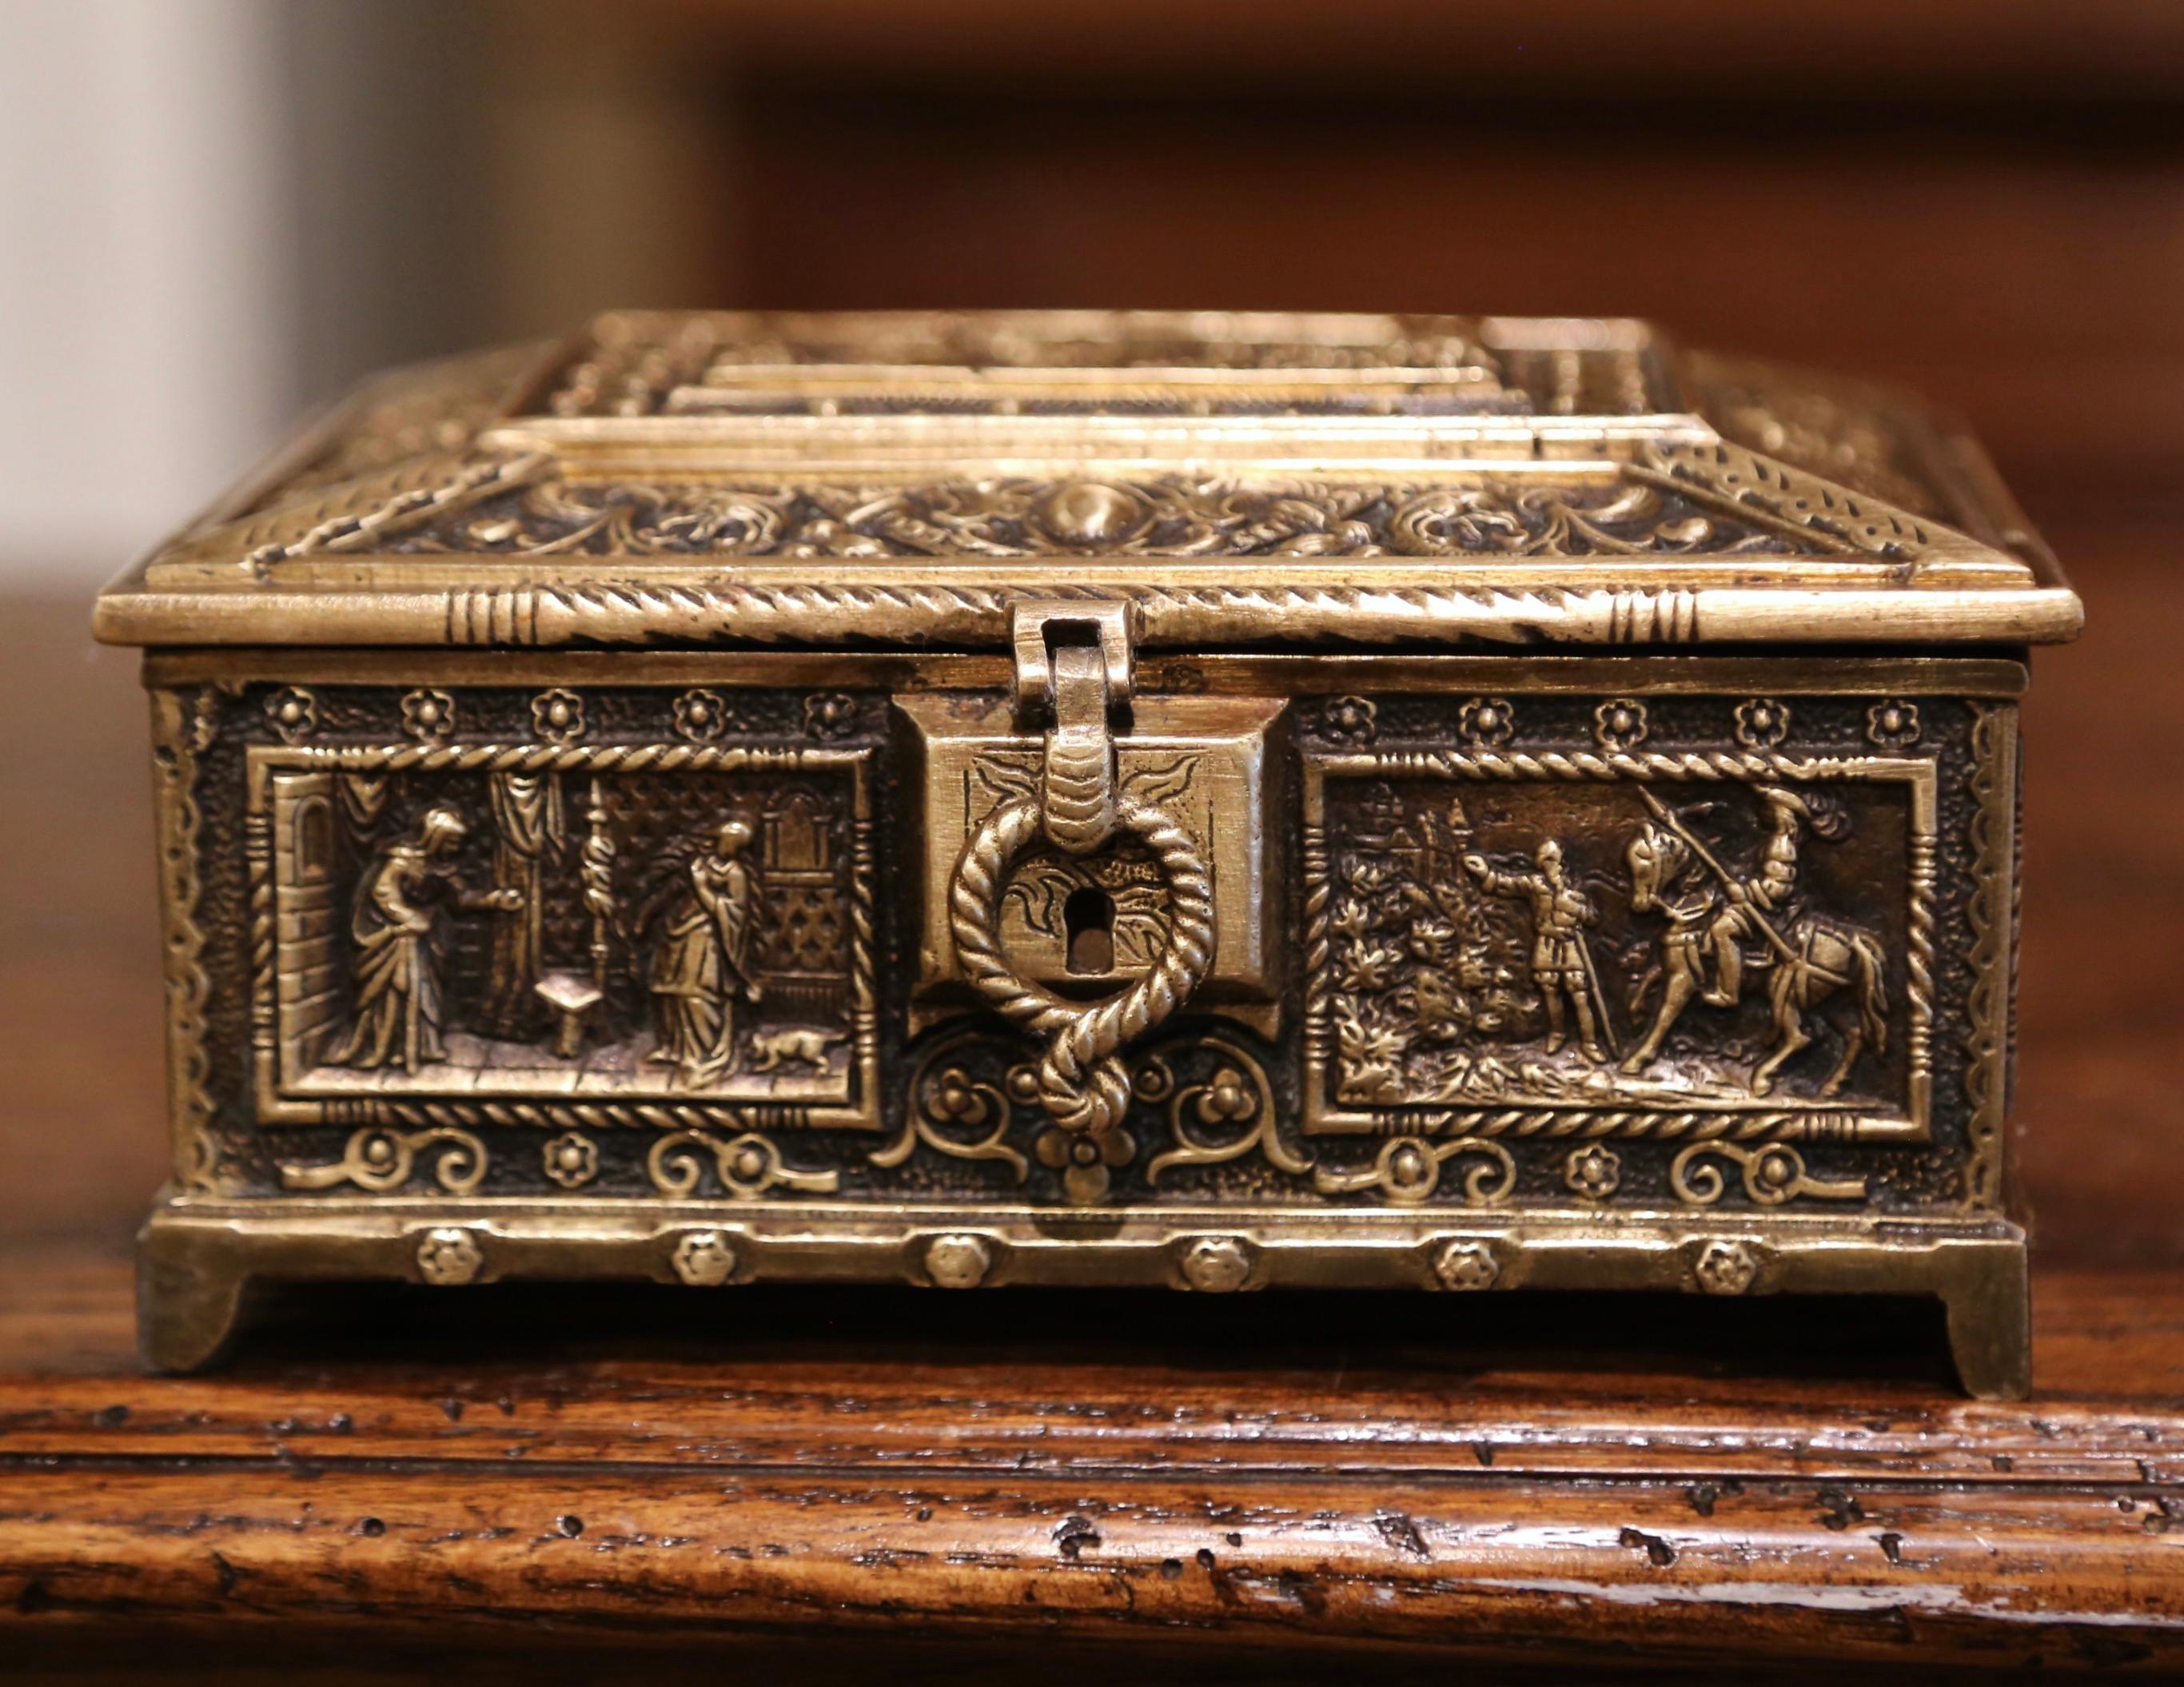 This antique Renaissance casket was created in France, circa 1880. Rectangular in shape, the gilt bronze box is embellished with mythological motifs, including a courting scene on the top. The detail work is outstanding with bas relief decor on all